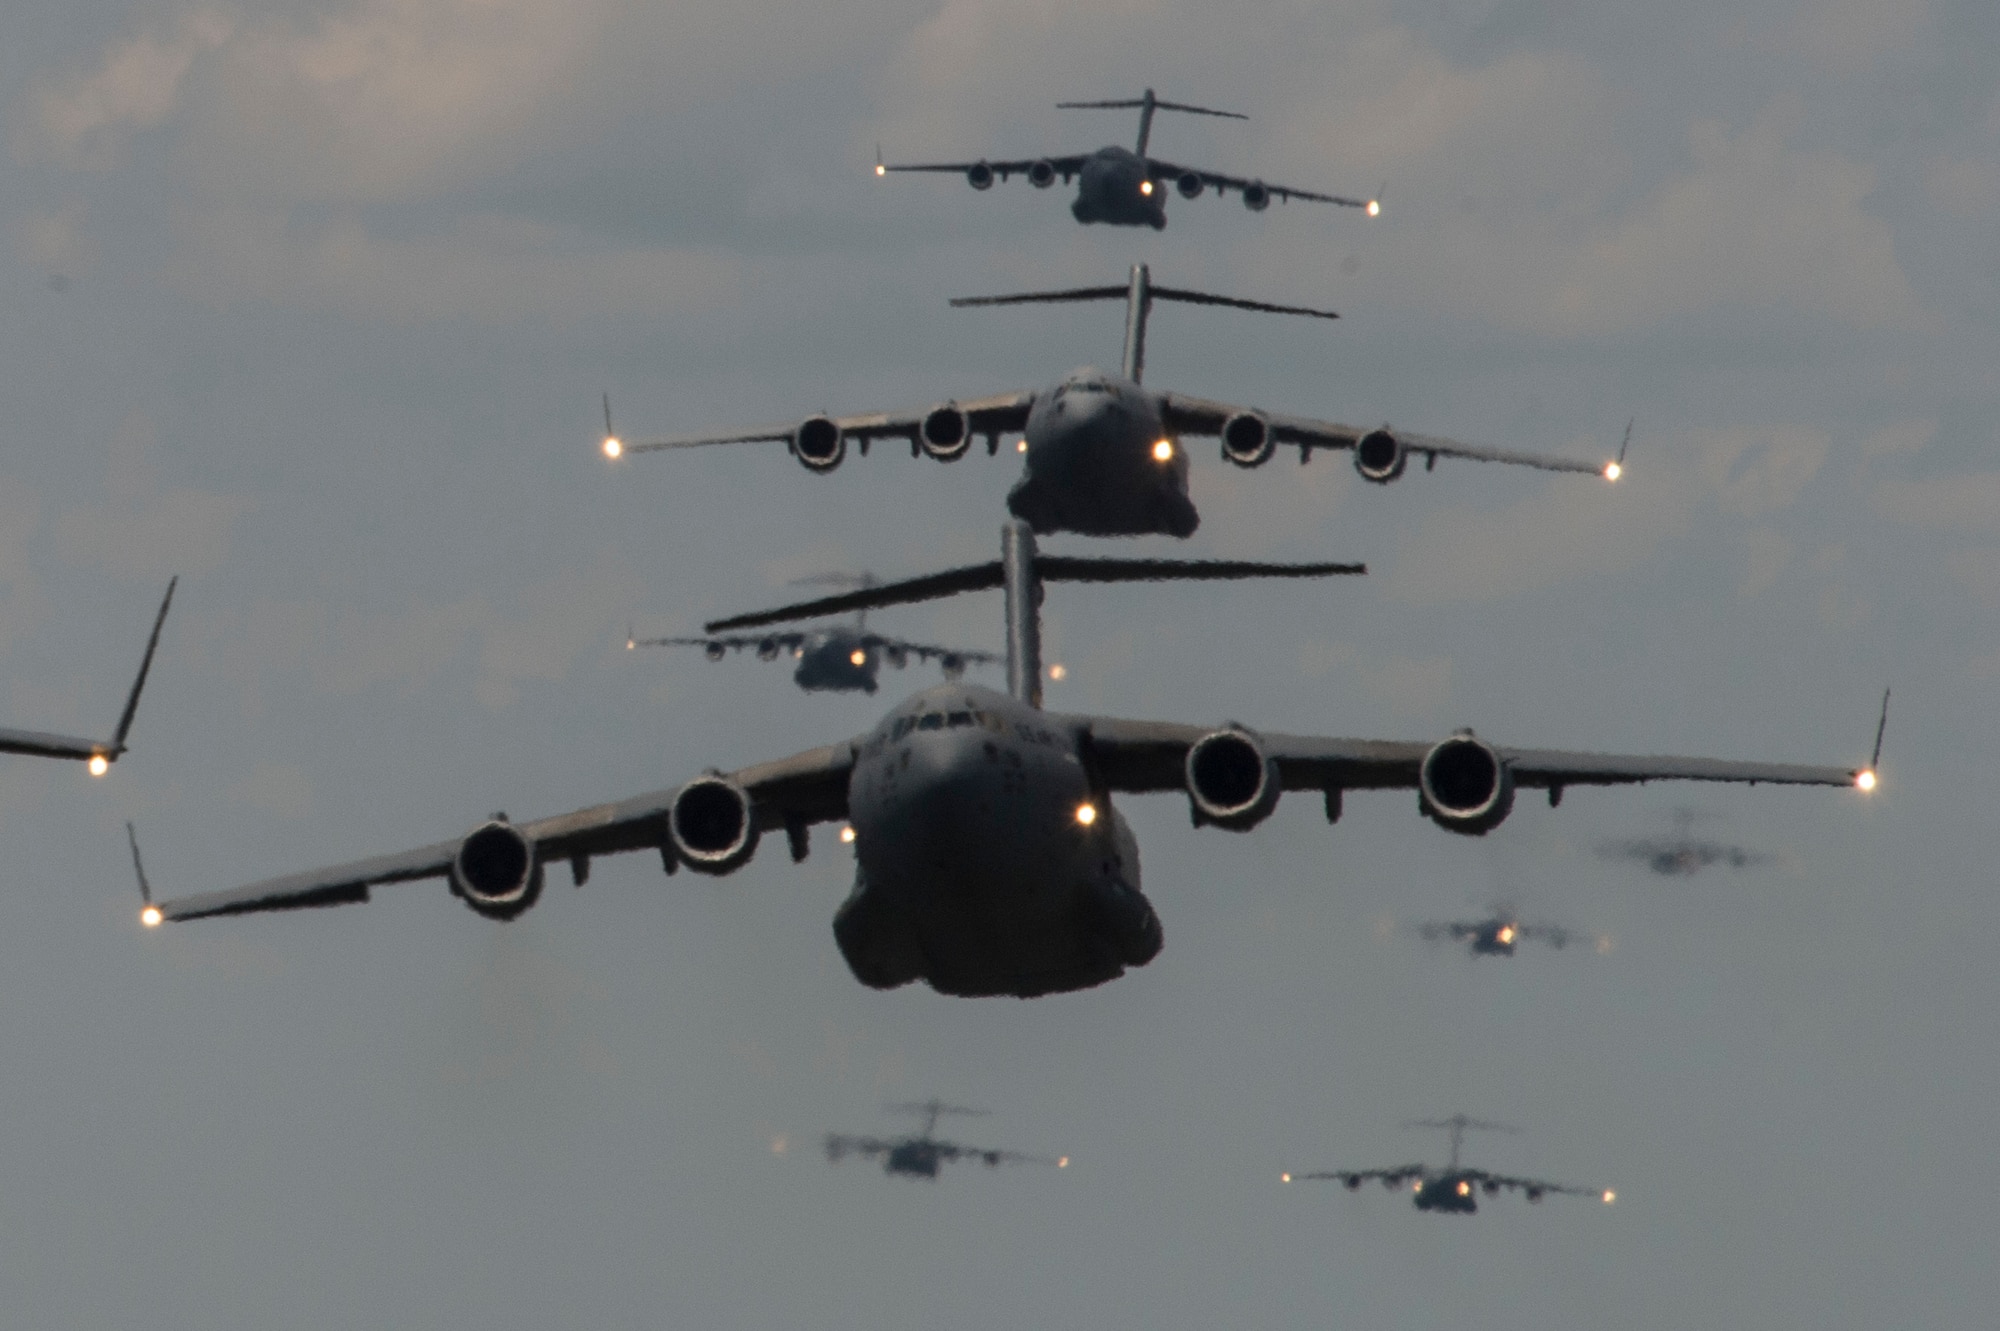 Members of the 437th Airlift Wing at Joint Base Charleston, S.C., conduct a multi-ship C-17 Globemaster III formation during Crescent Reach 15 on May 21, 2015. The exercise tested and evaluated JB Charleston's ability to launch a large aircraft formation in addition to processing and deploying duty passengers and cargo in response to a simulated crisis abroad. (U.S. Air Force photo/Staff Sgt. Corey Hook)